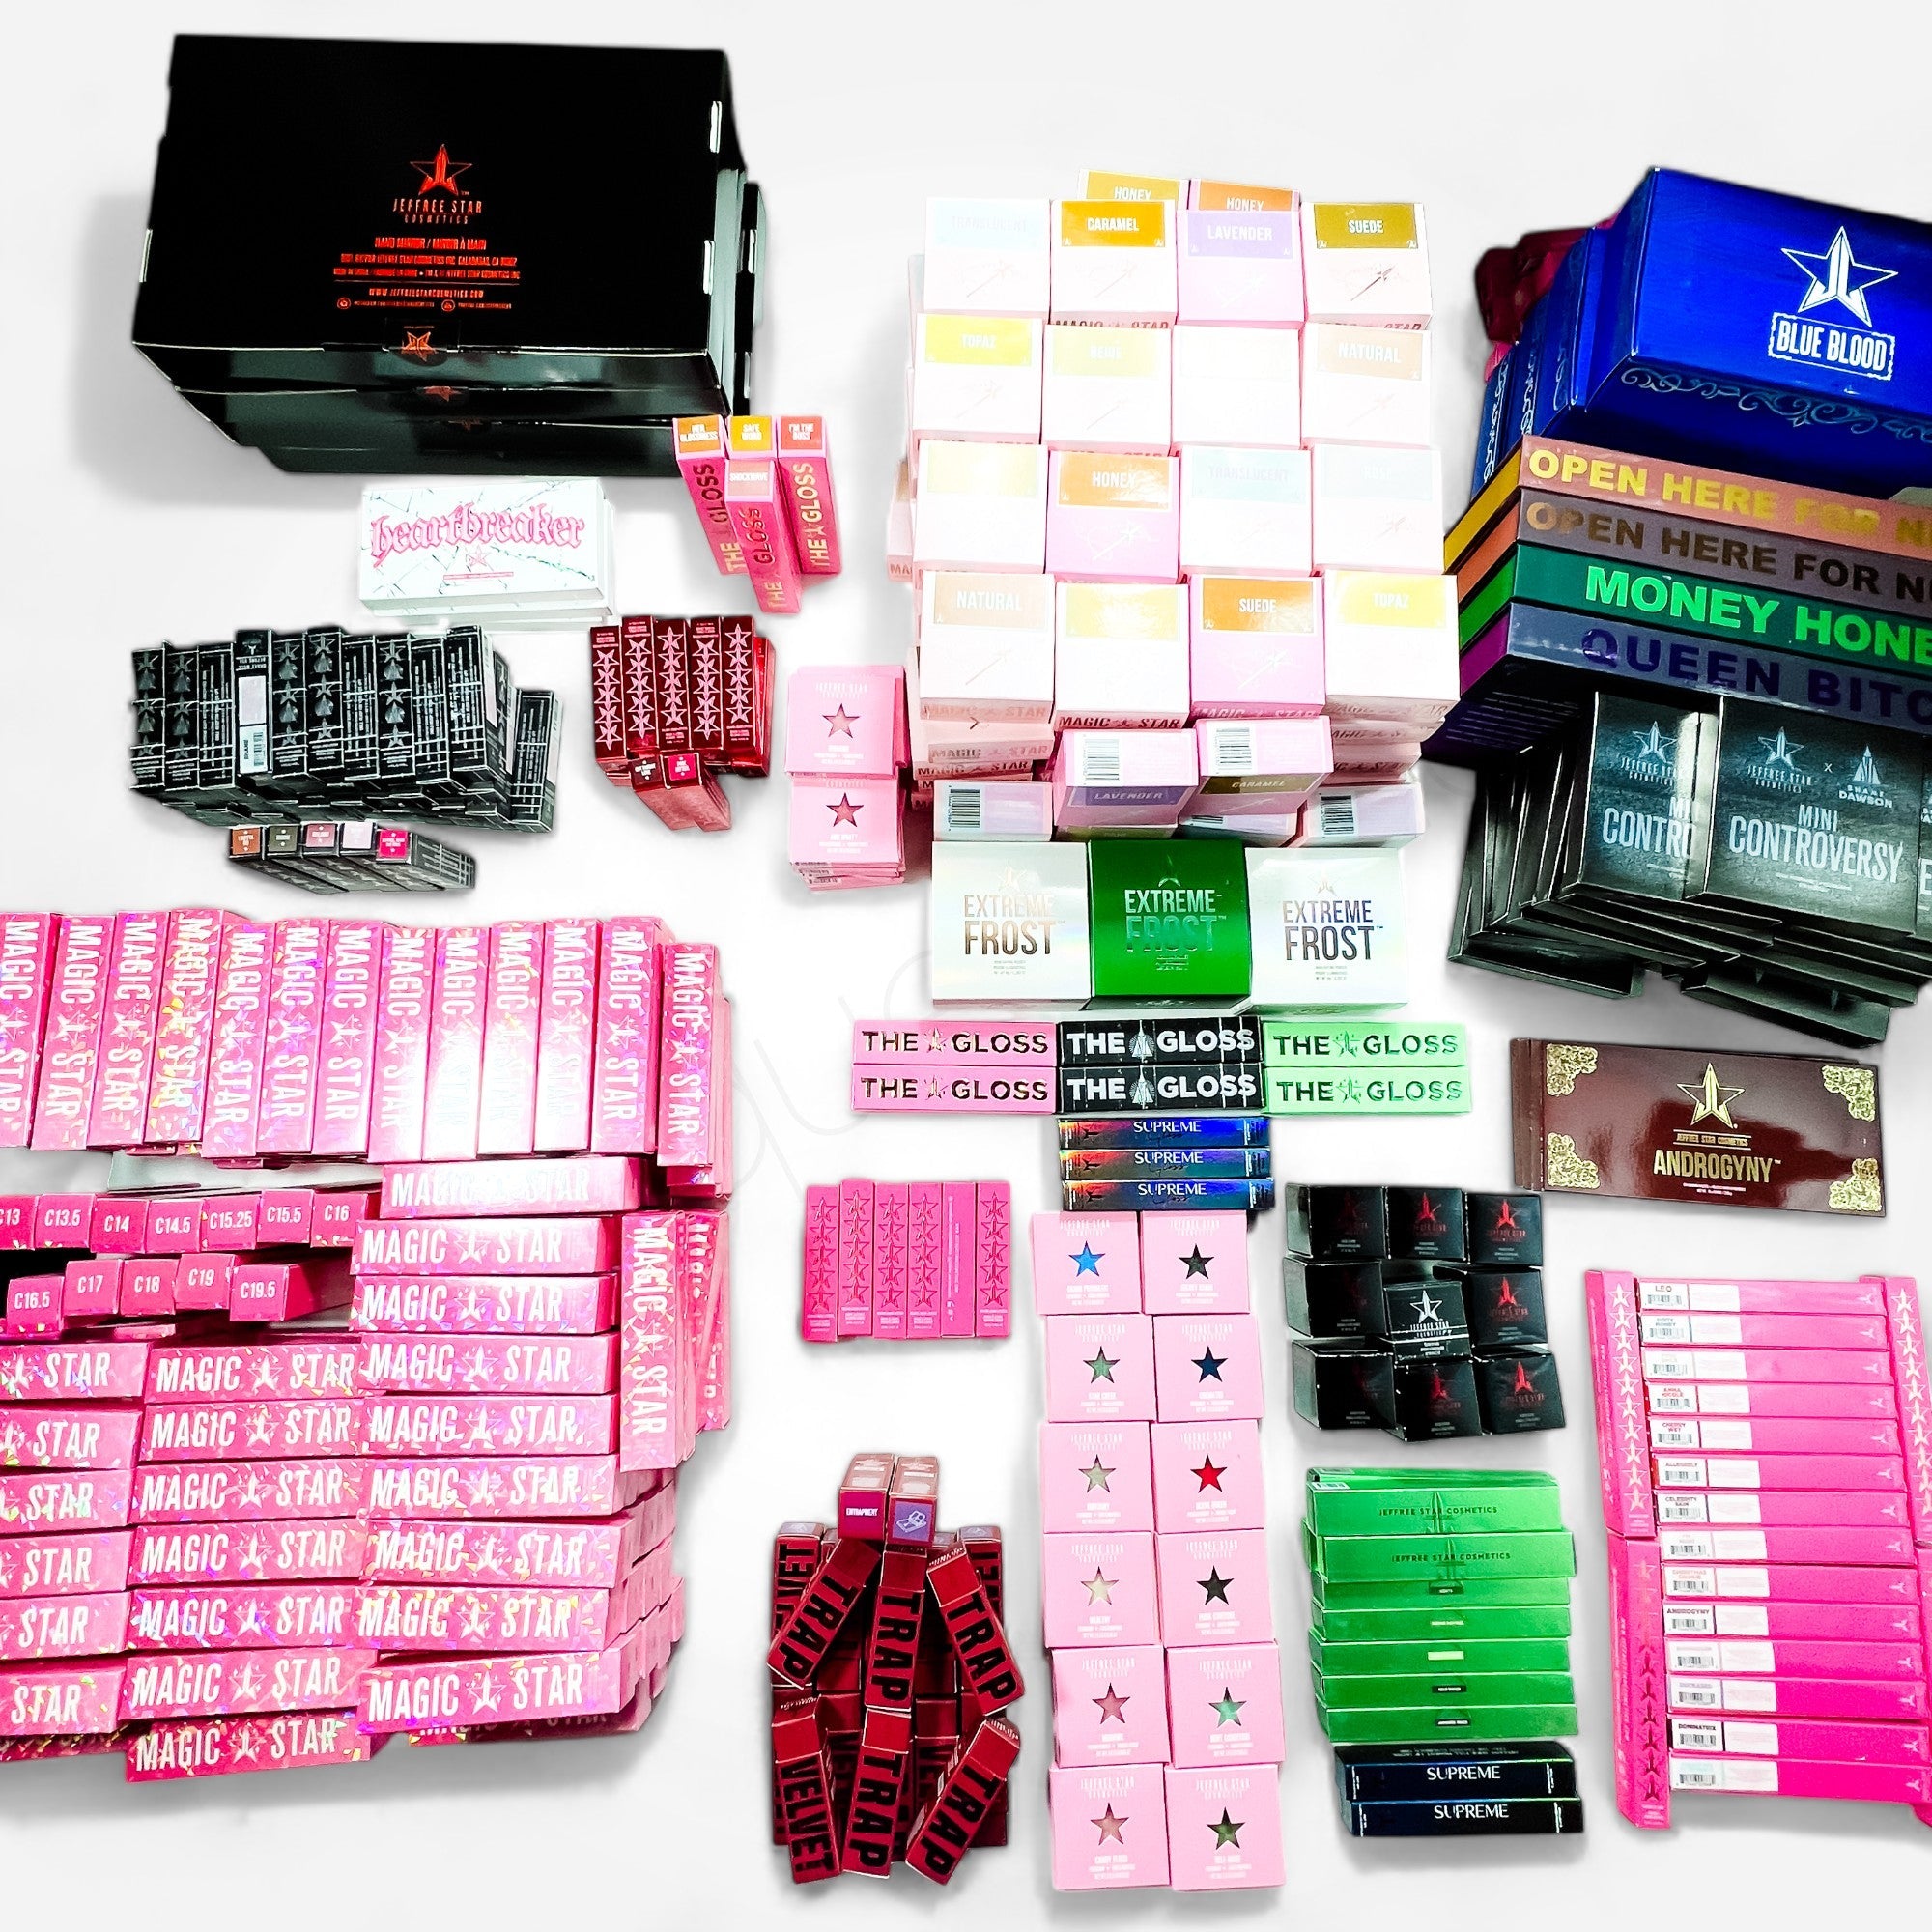 Jeffree Star Cosmetics New Wholesale 500 units - Boutique by the Box Wholesale for Resellers